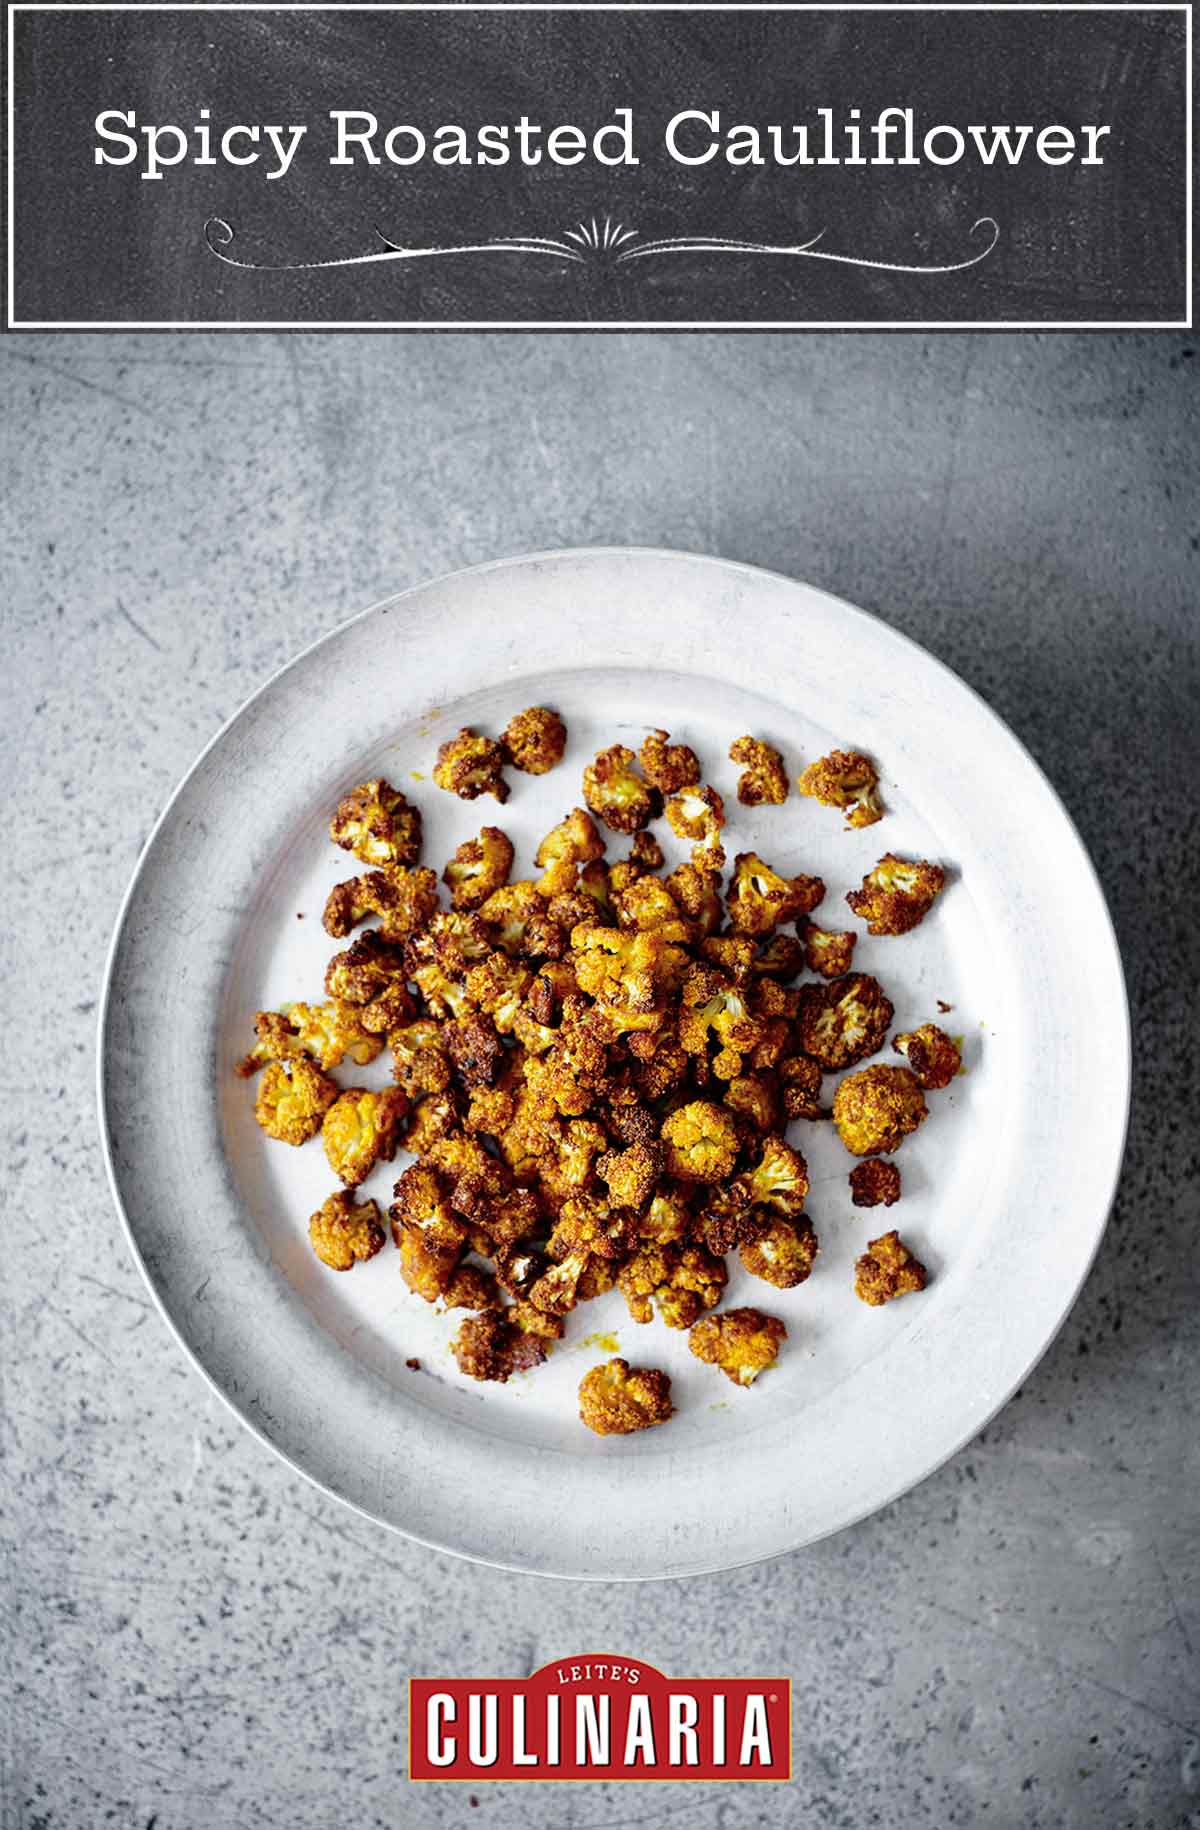 A plate filled with spicy roasted cauliflower florets.